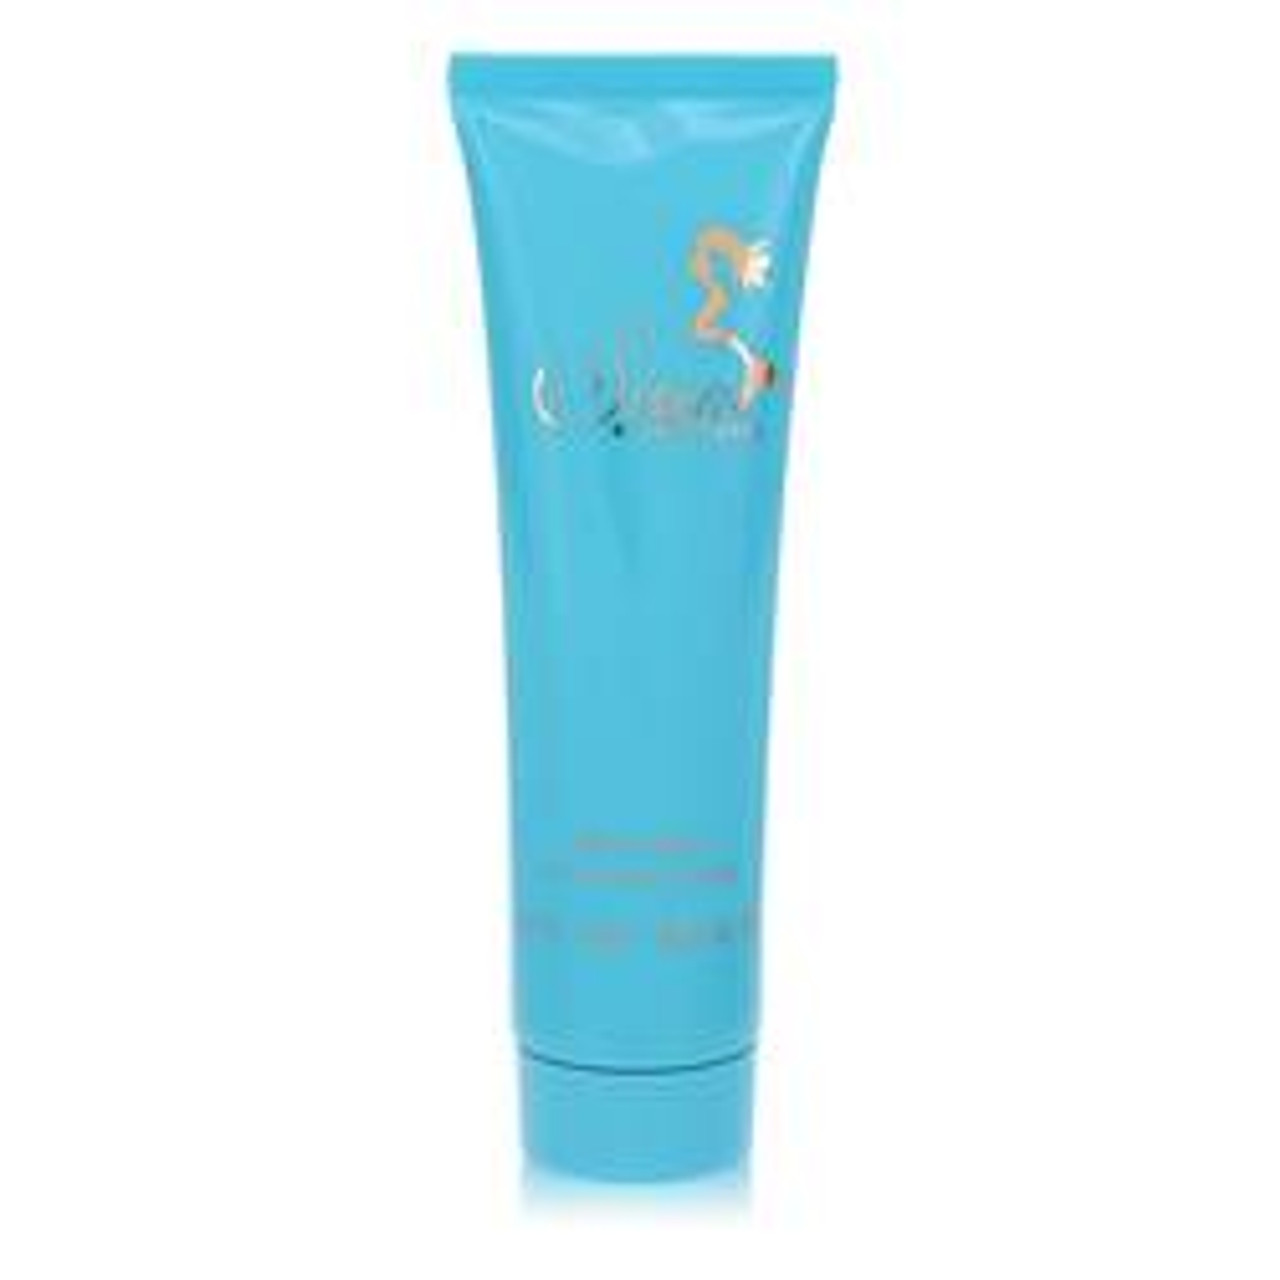 Siren Perfume By Paris Hilton Body Lotion 3 oz for Women - [From 11.00 - Choose pk Qty ] - *Ships from Miami